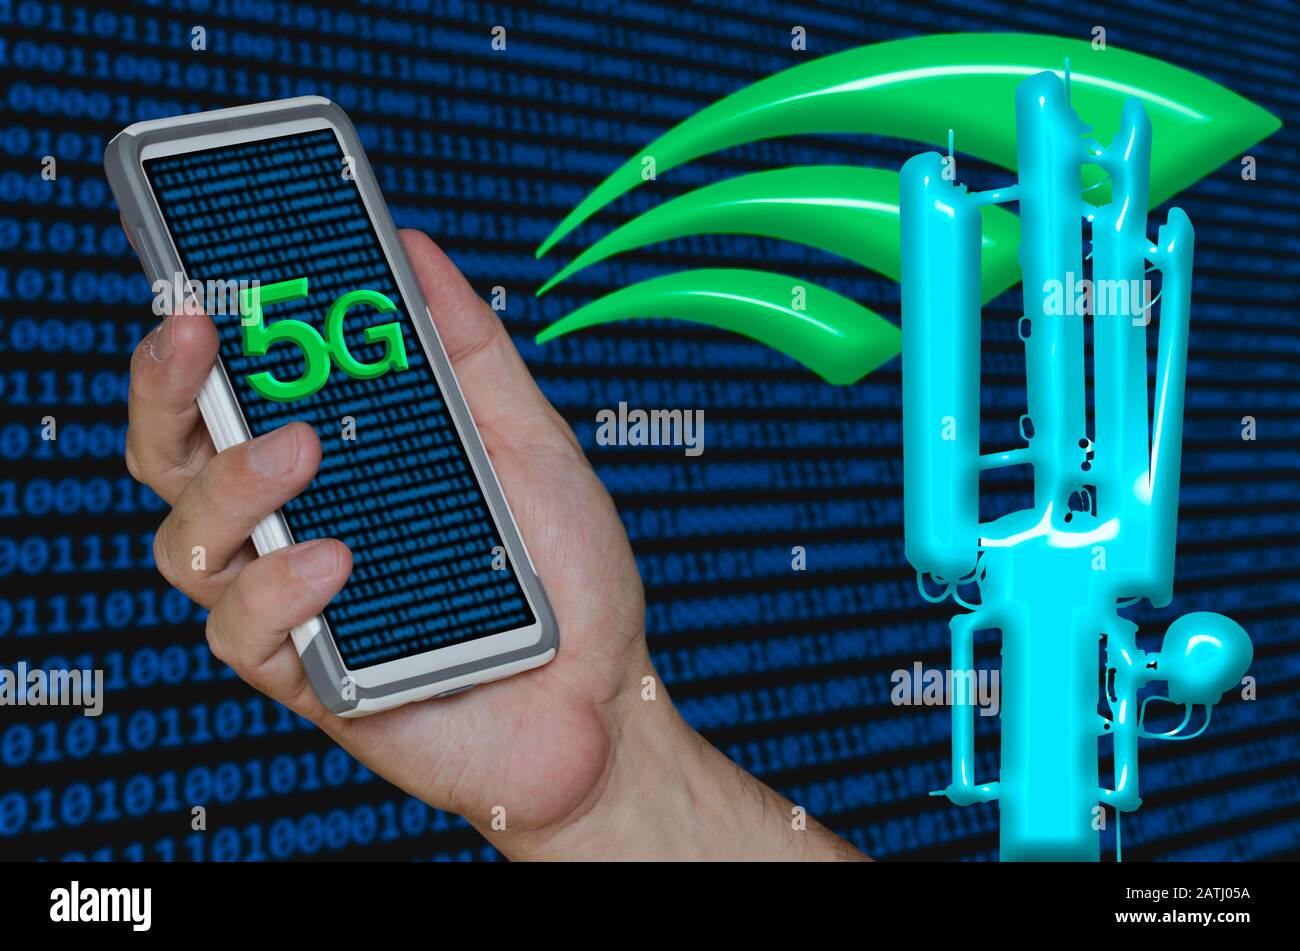 5G concept. Illustration of holding smartphone with 5G logo and antenna, with digital data as a backdrop. 5G wireless data communications technology. Stock Photo